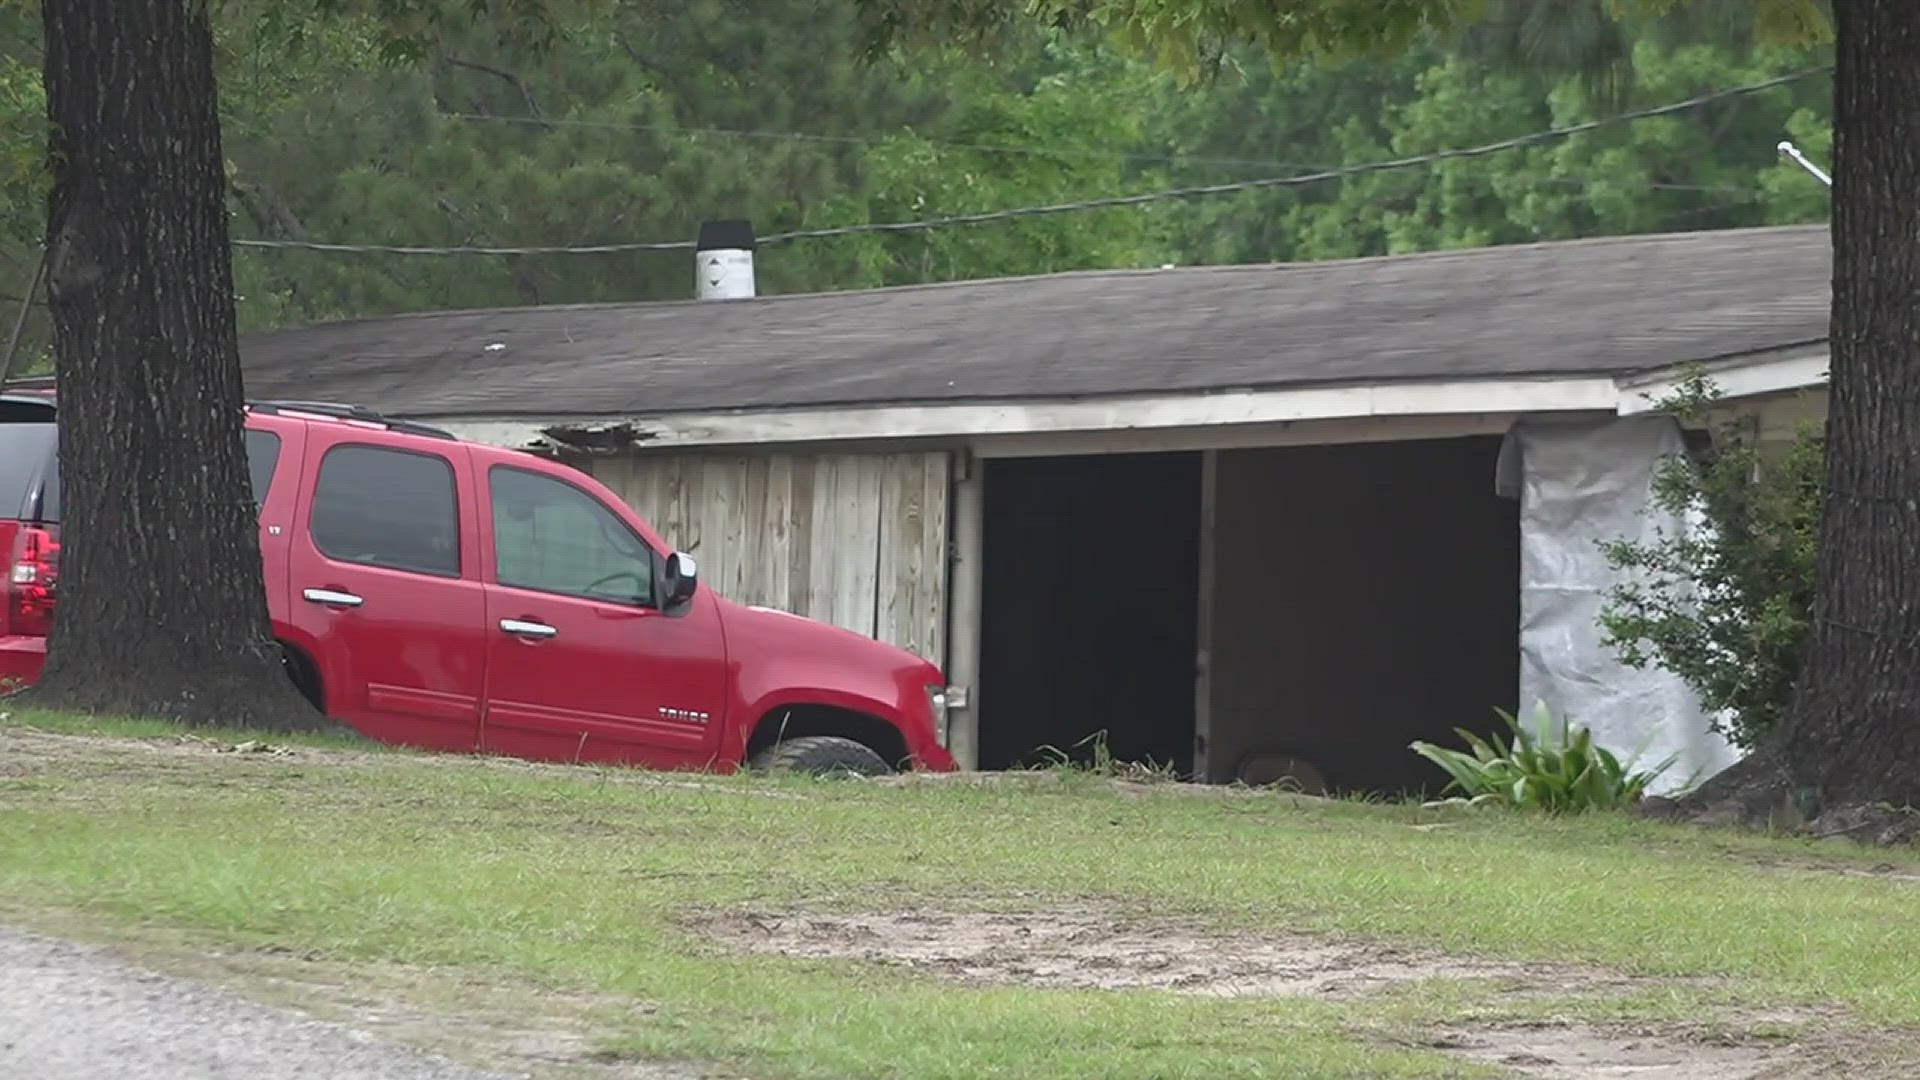 Jasper County deputies are looking for "persons of interest" after an overnight shooting left nine teenagers injured and believe a second shooting could be related.